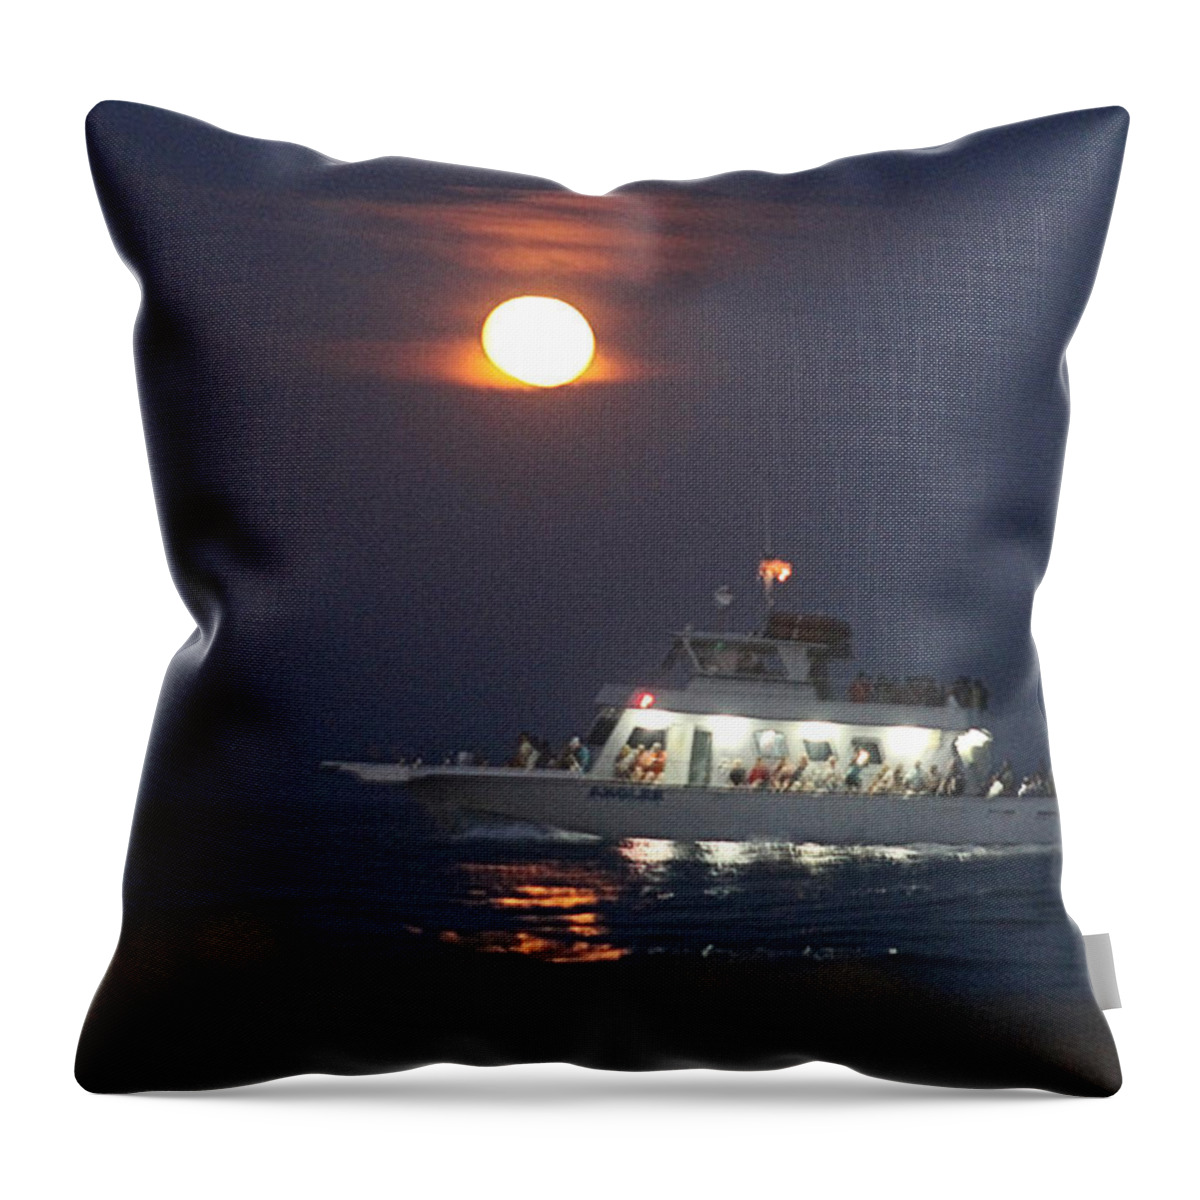 Boat Throw Pillow featuring the photograph Angler Cruises Under Full Moon by Robert Banach